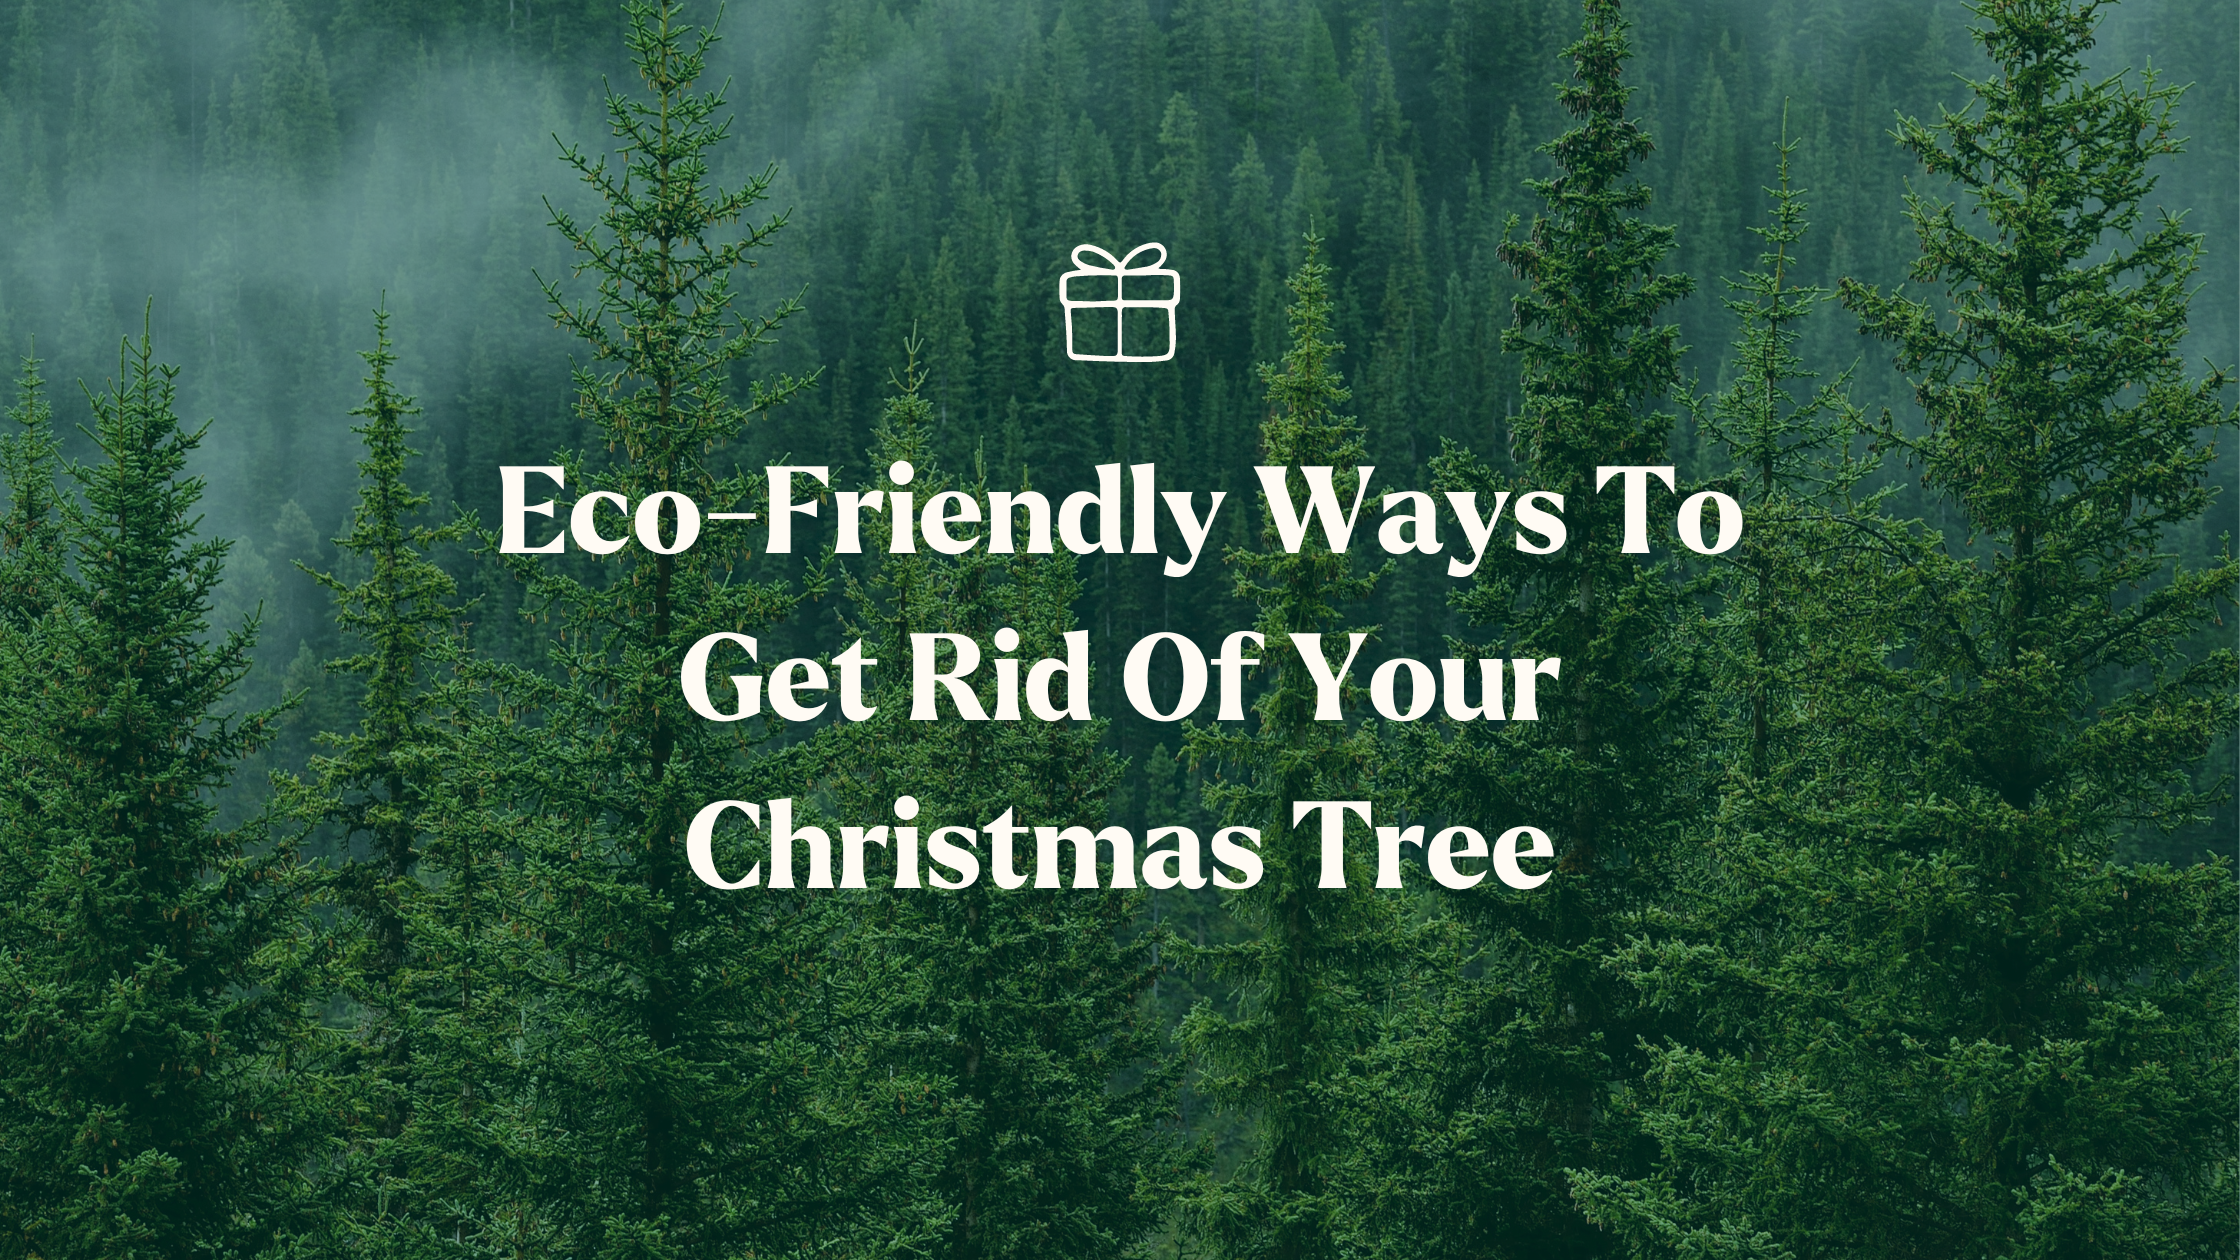 Eco-Friendly Ways To Get Rid Of Your Christmas Tree